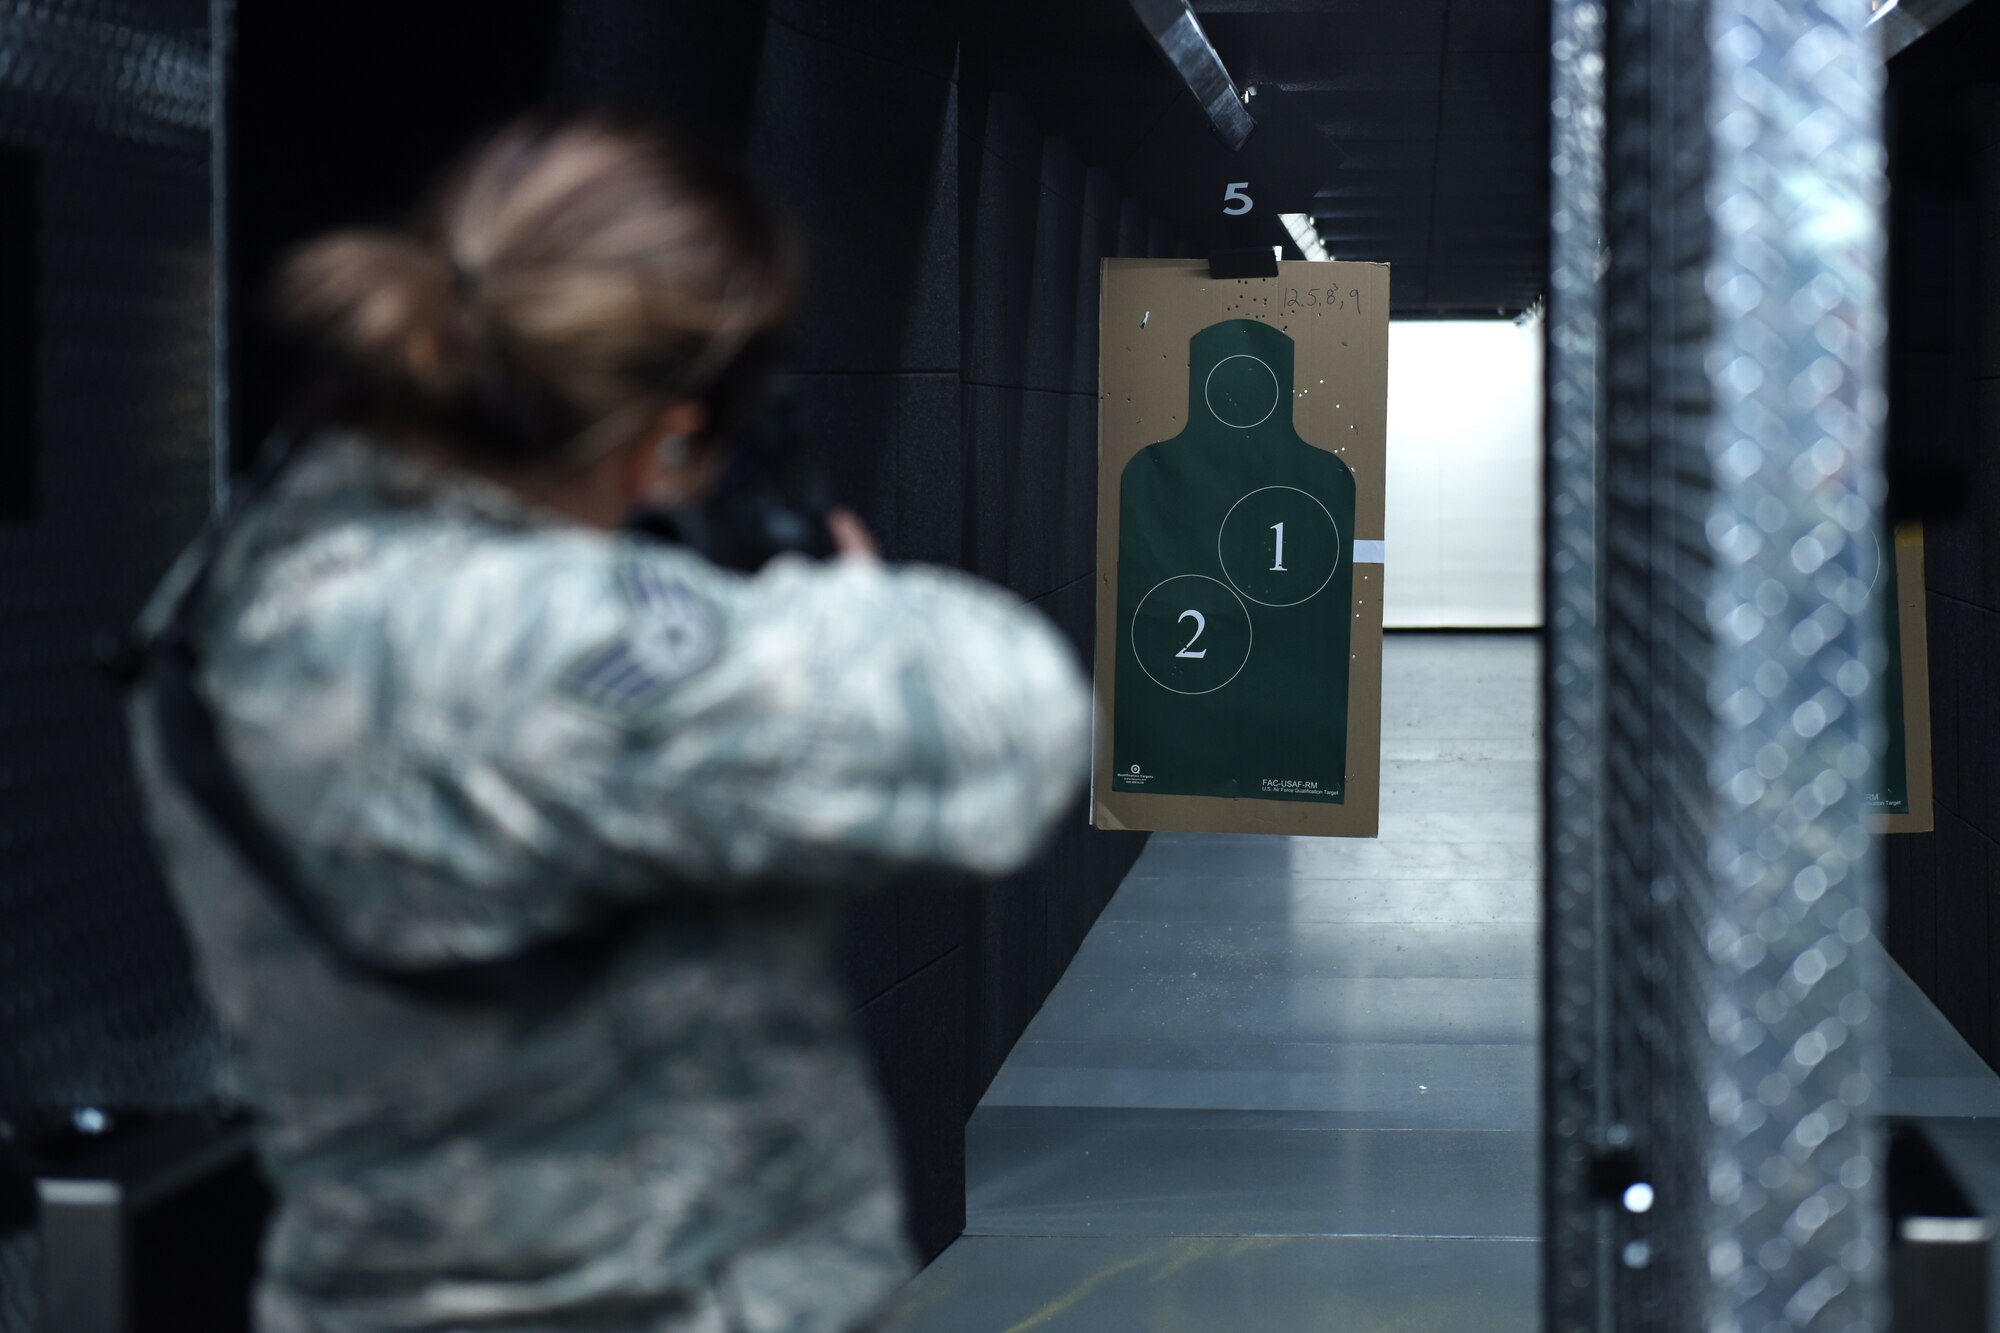 Staff Sgt. Jess Thebeau, munitions systems technician, assigned to the 180th Fighter Wing, Ohio Air National Guard, lines her shot up to the target during the first weapons qualification class in the new Modular Small Arms Range in Swanton, Ohio, Nov. 30, 2018. The high-tech facility is climate-controlled, has high efficiency air handlers, bullet traps and multiple simulation options that promotes safety, while providing scenario-based shooting situations for personnel to train and meet readiness requirements. (Air National Guard Photo by Senior Airman Hope Geiger)